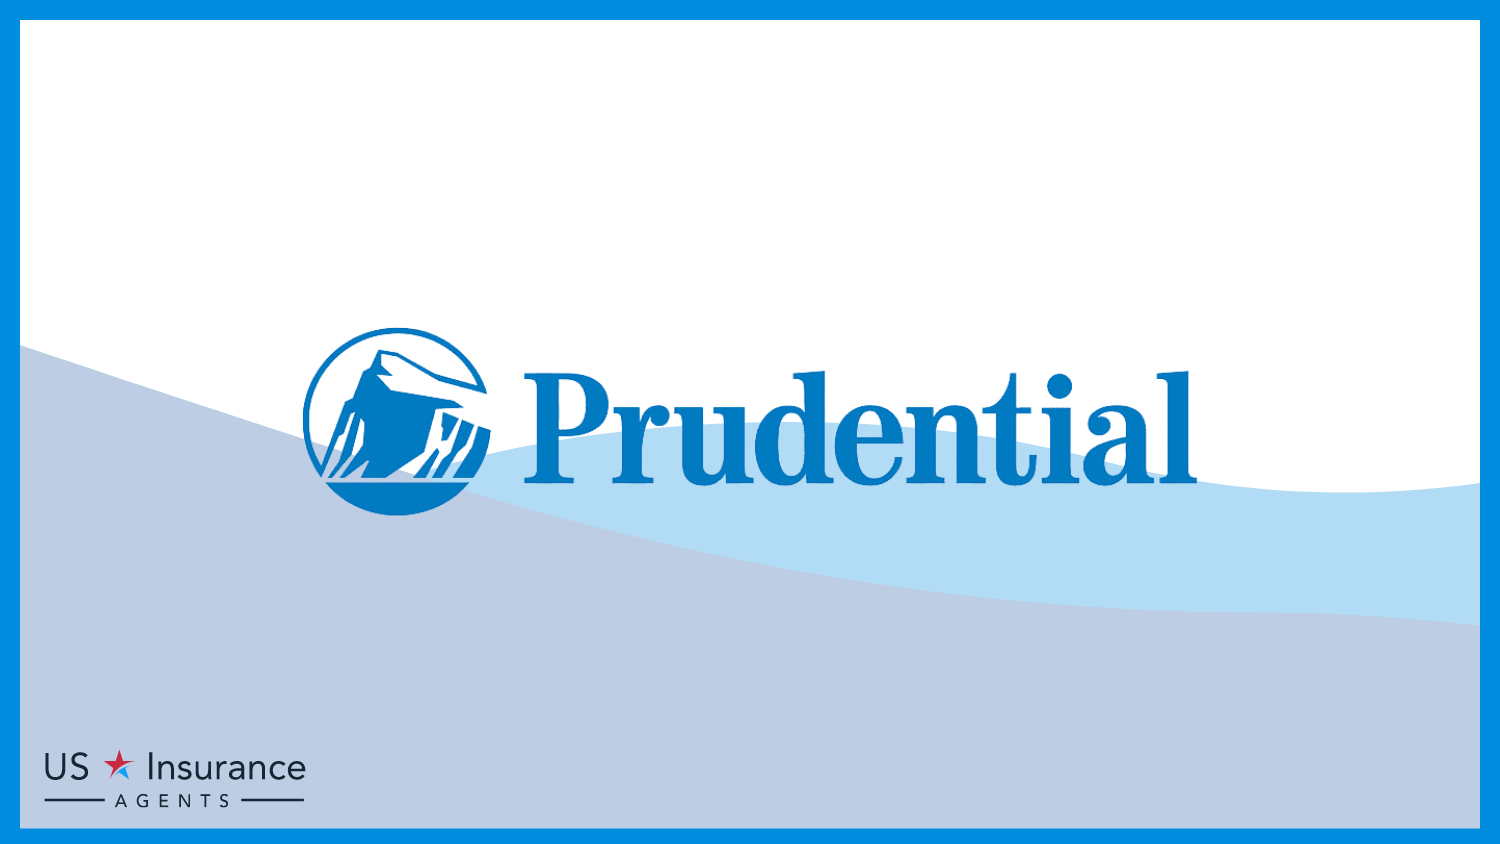 Prudential: Best Life Insurance for Kidney Transplant Patients